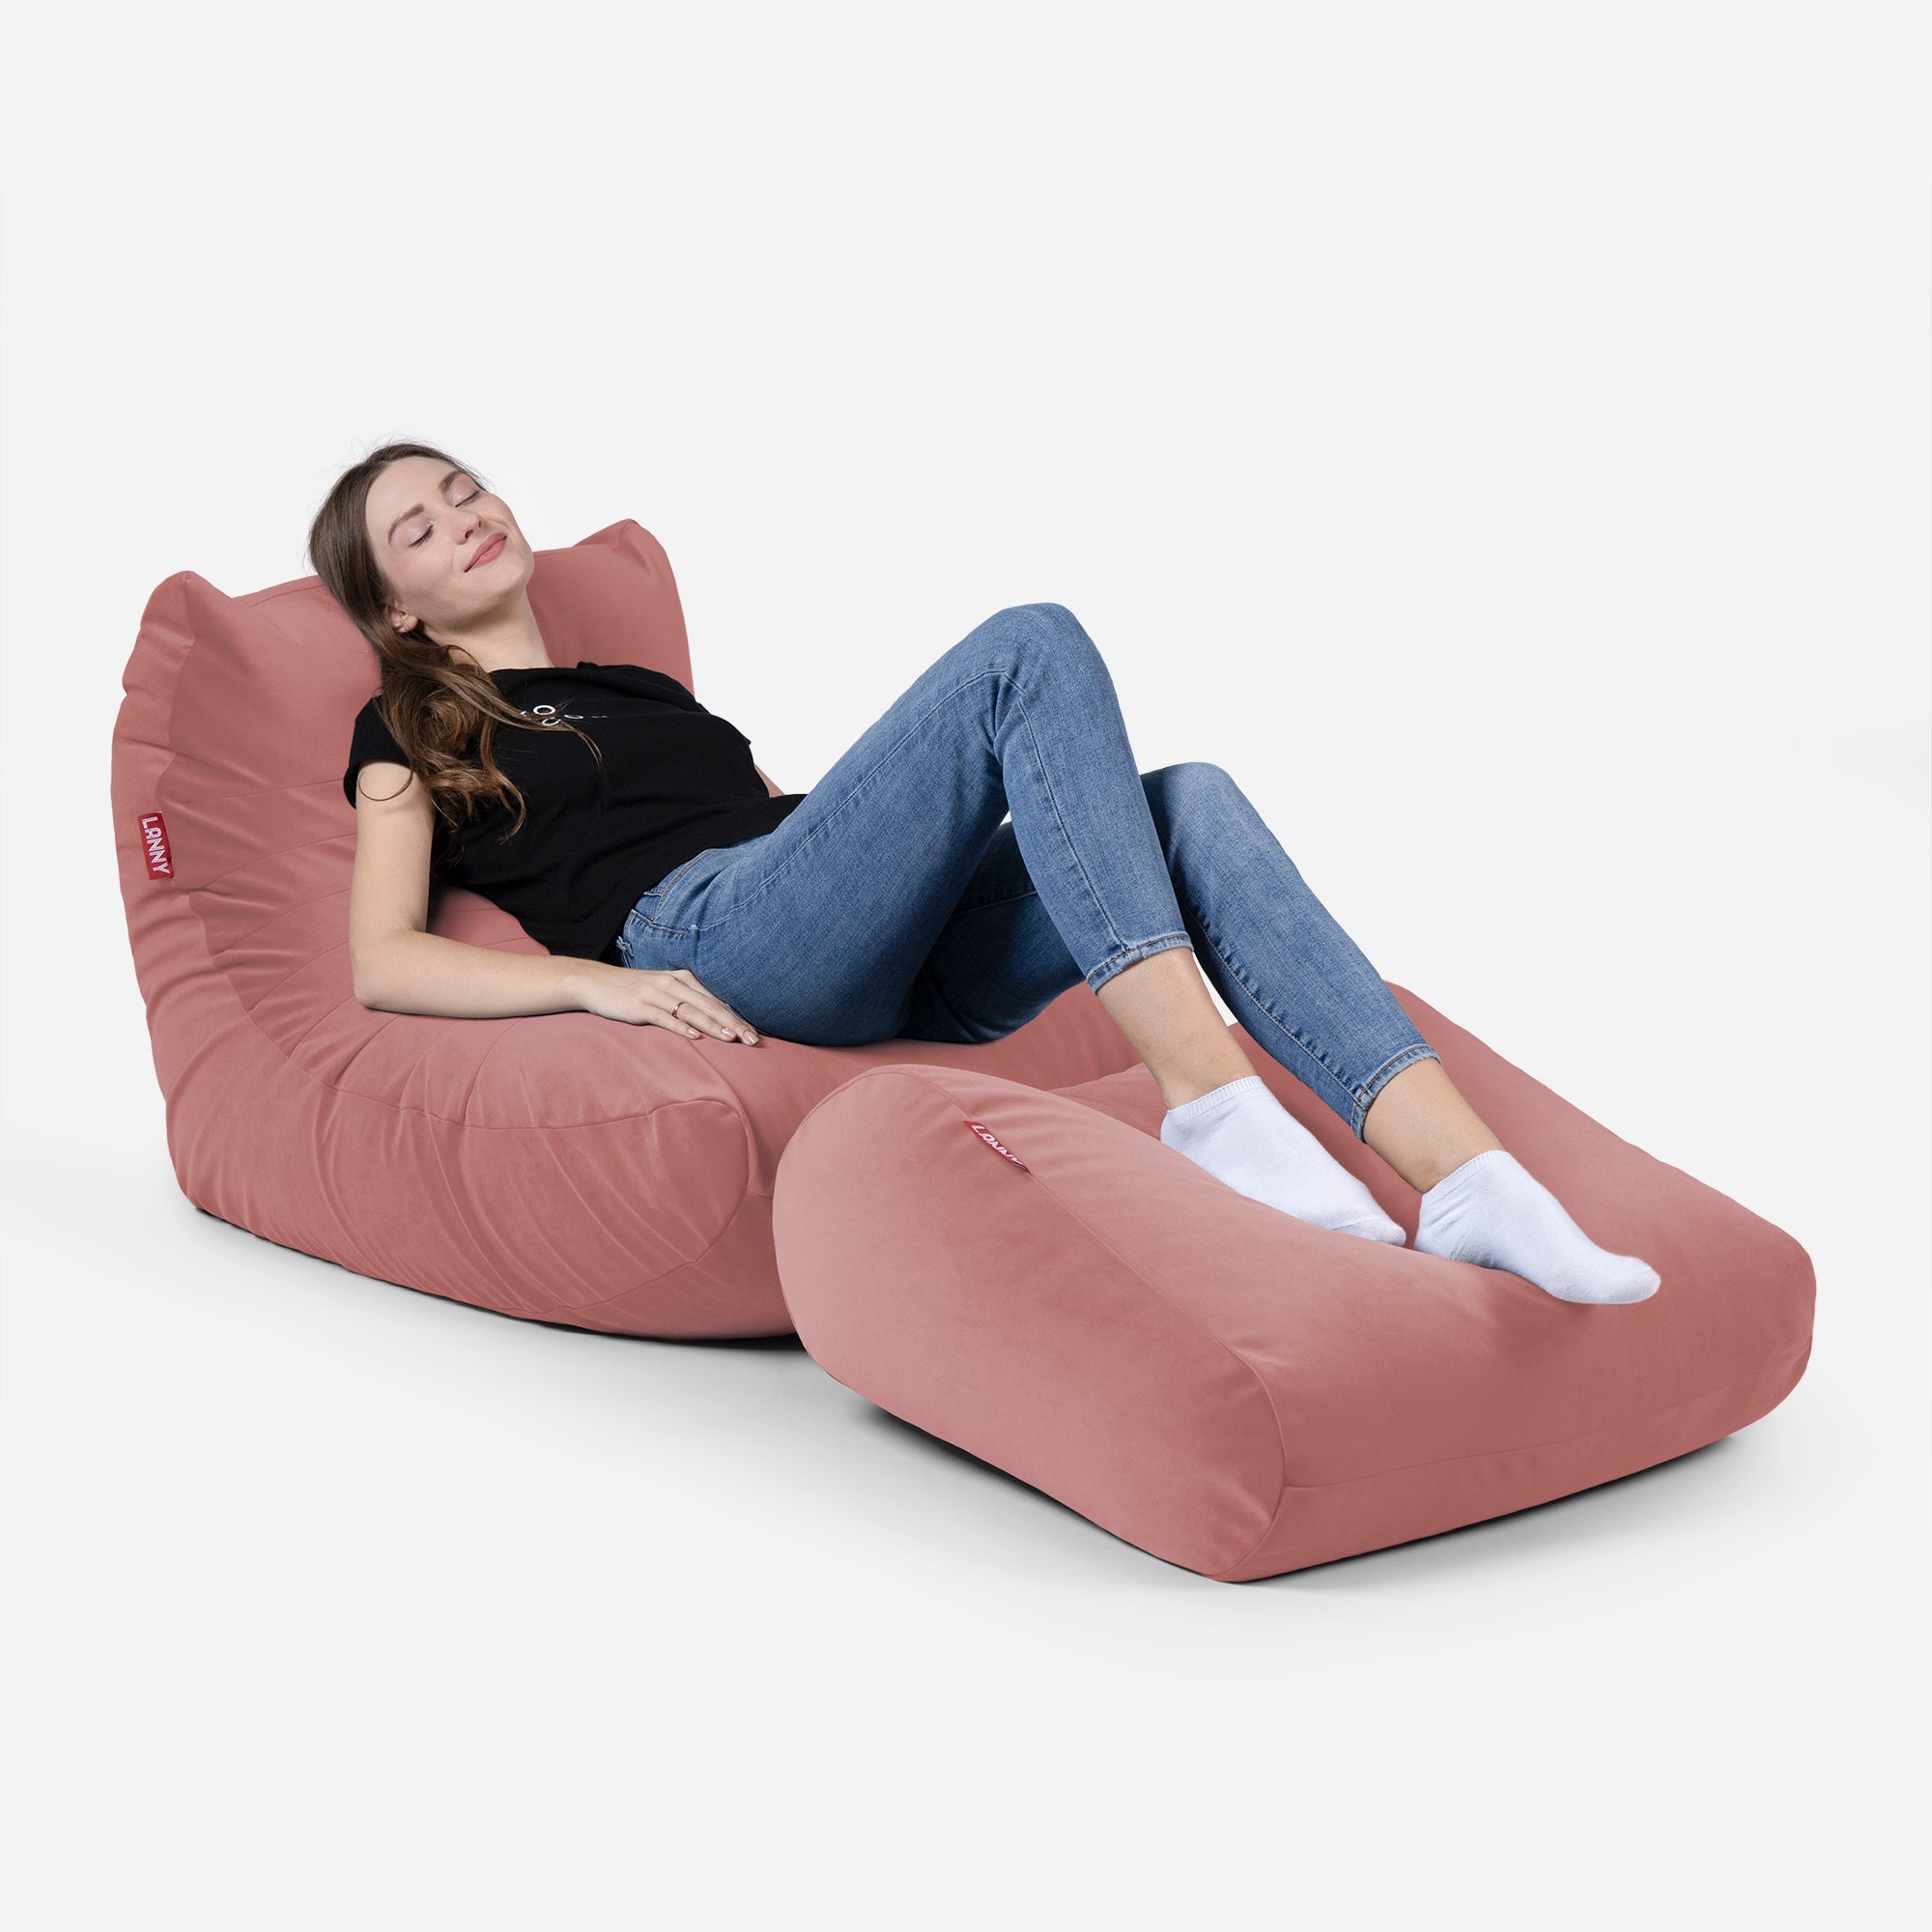 Beanbag Curvy Design Pink color with girl seating on it